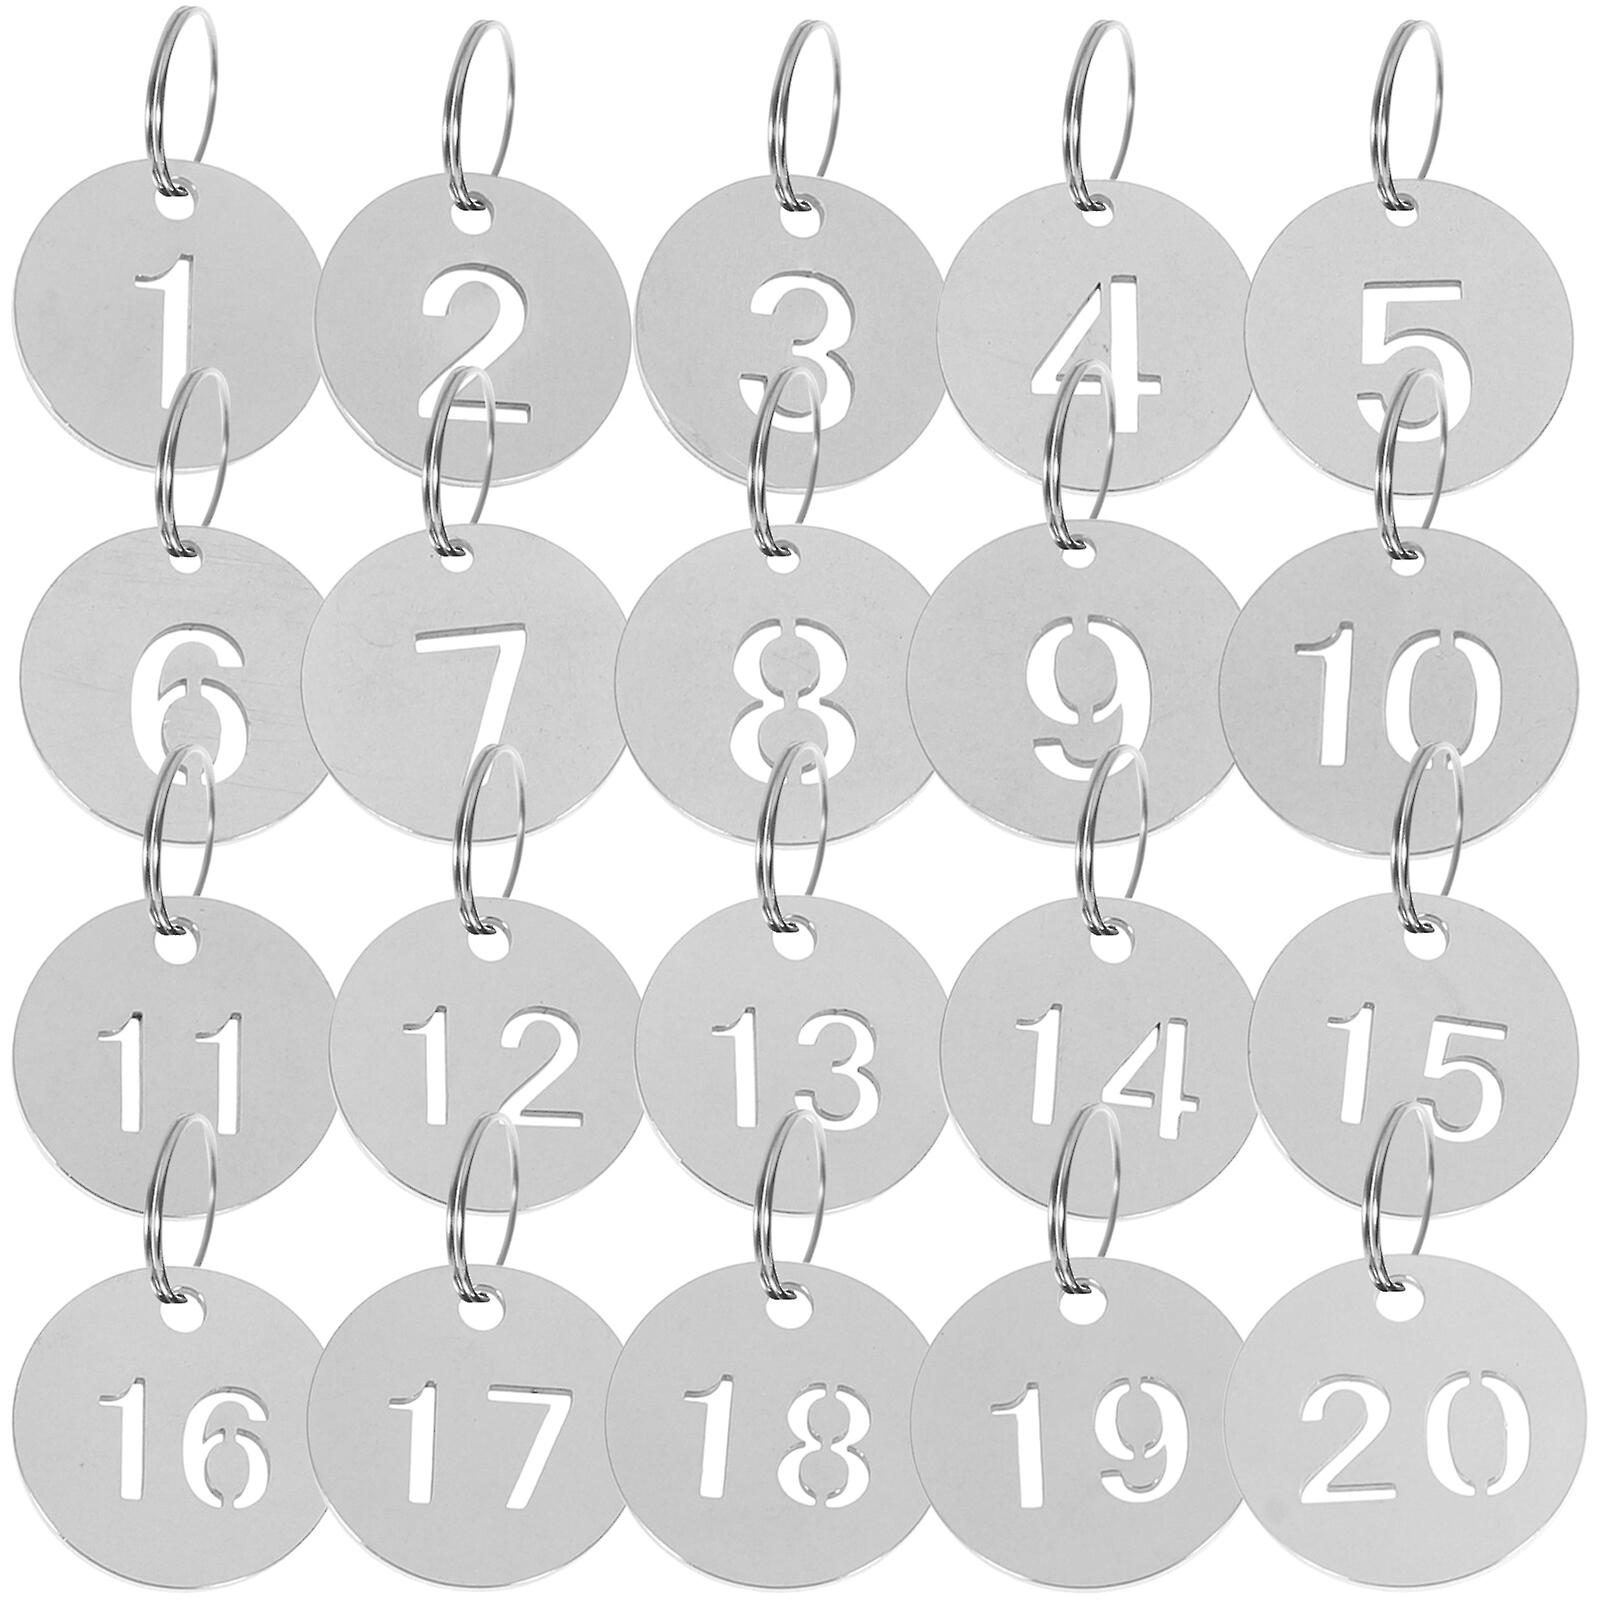 20pcs Stainless Steel Numbered 1-20 Tags Key Tags Stainless Steel Id Tags Luggage Tags